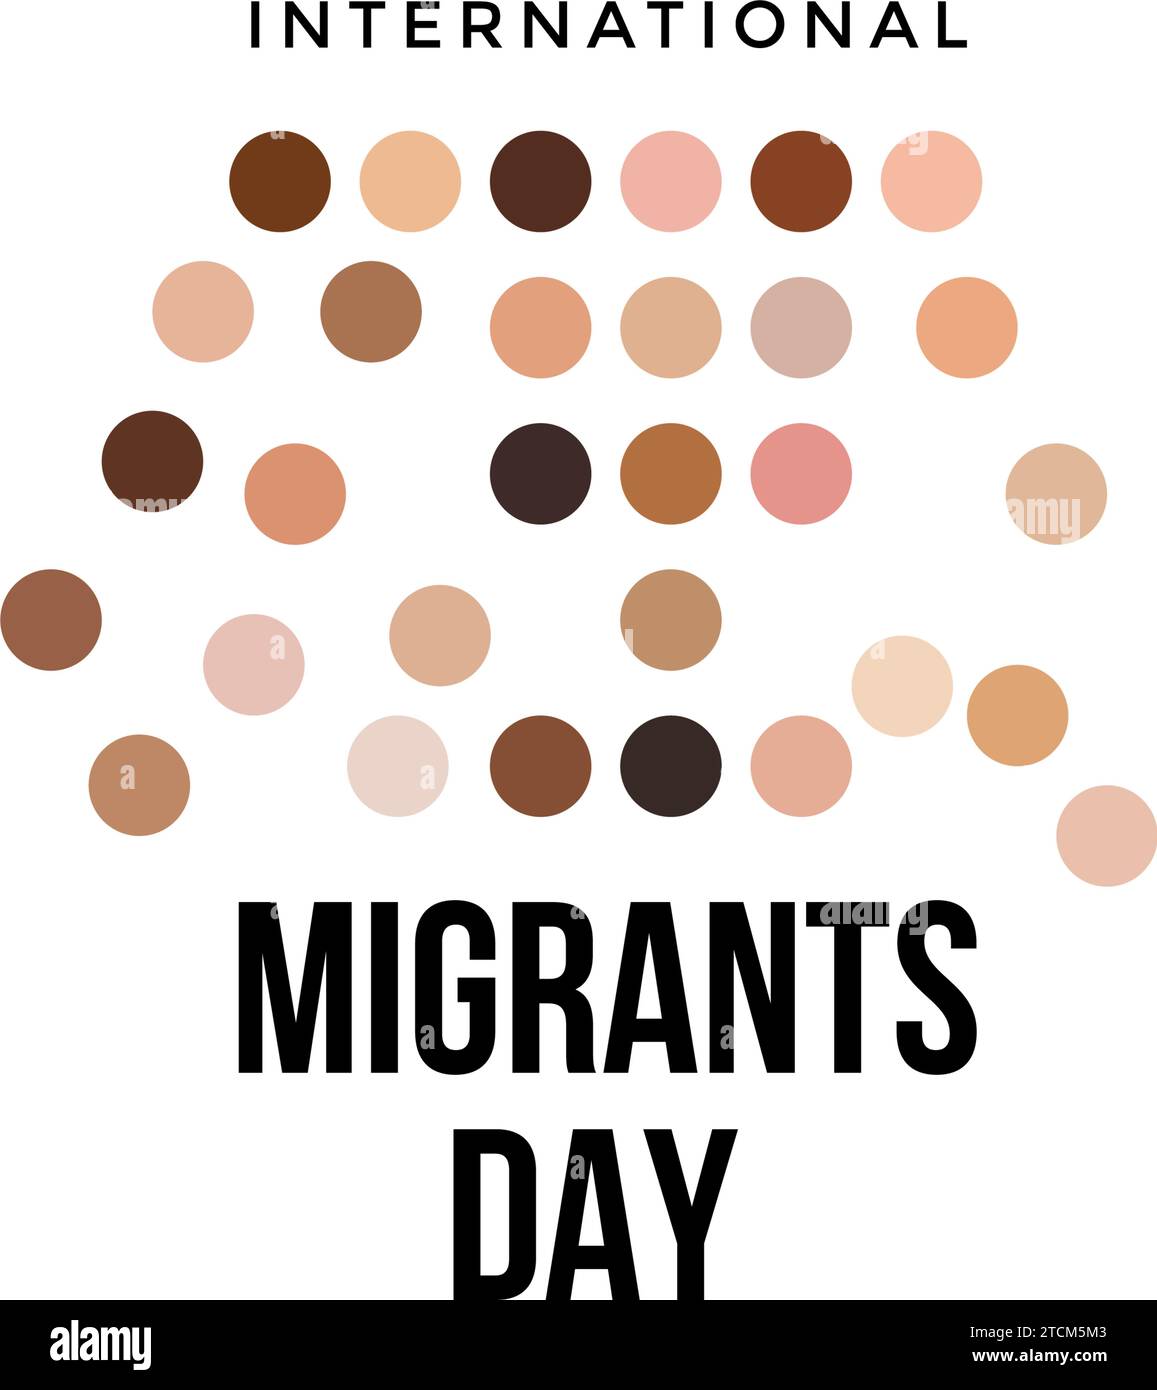 International migrants day on December 18 poster design. for printing and web uses. Stock Vector